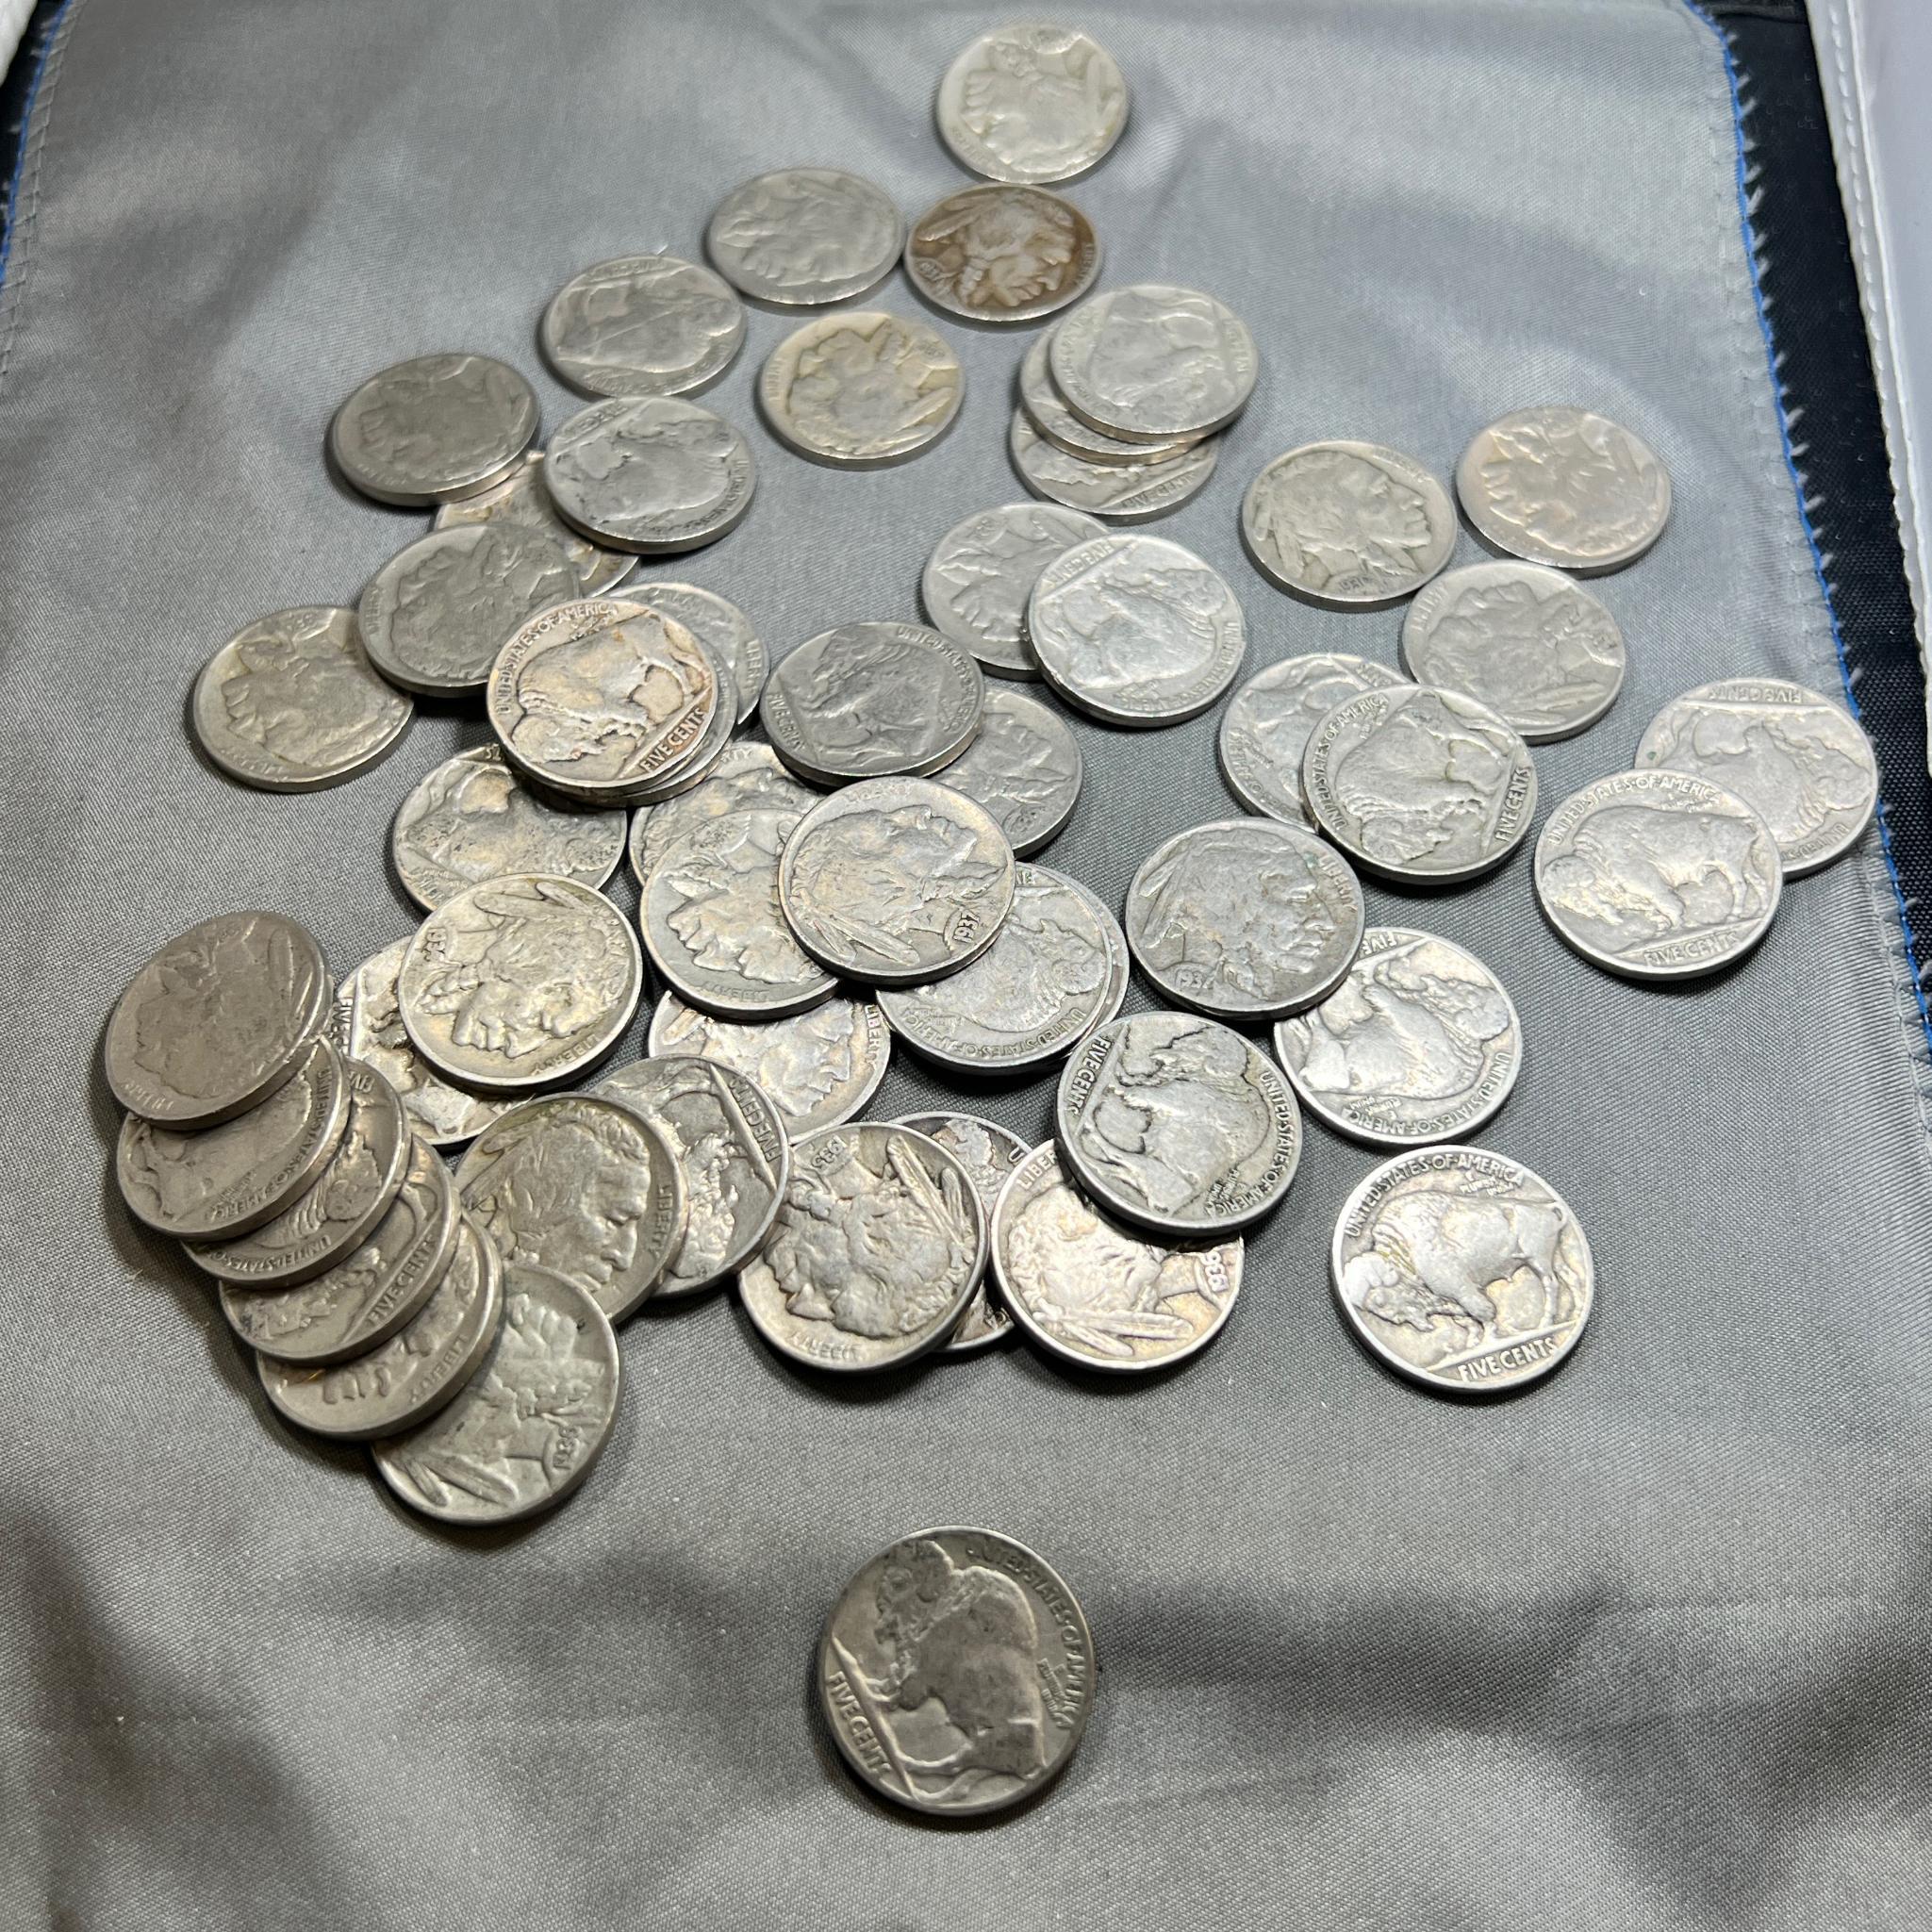 Lot of Asst. Buffalo Nickels, ALL have readable dates